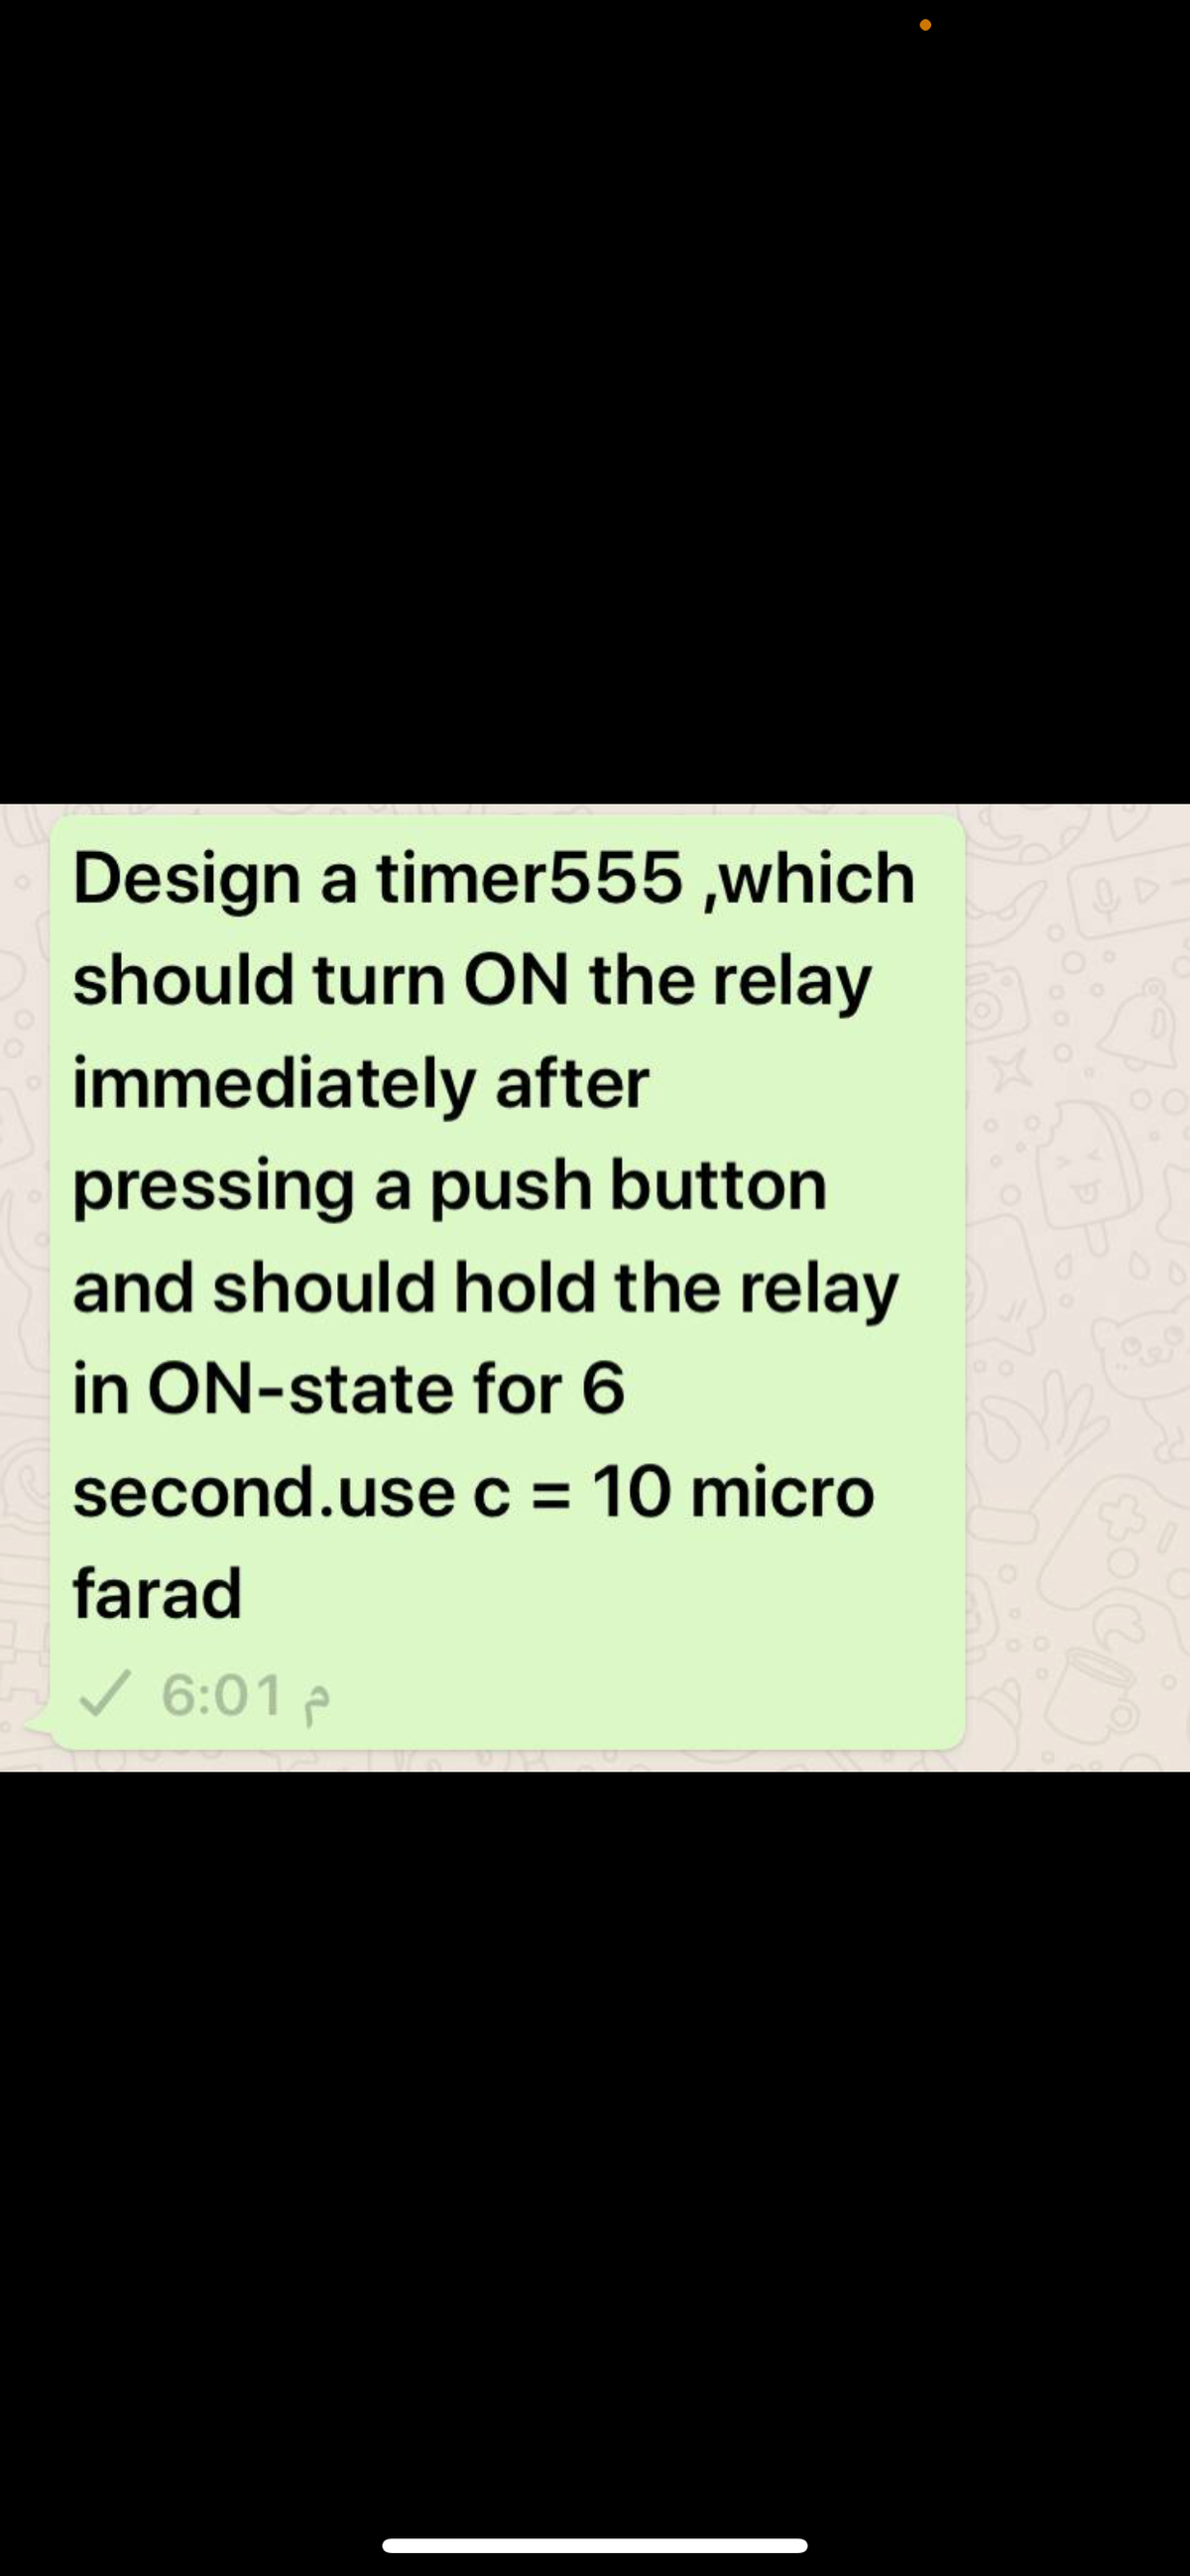 Design a timer555 ,which
should turn ON the relay
immediately after
pressing a push button
and should hold the relay
in ON-state for 6
second.use c = 10 micro
farad
v 6:01 p
